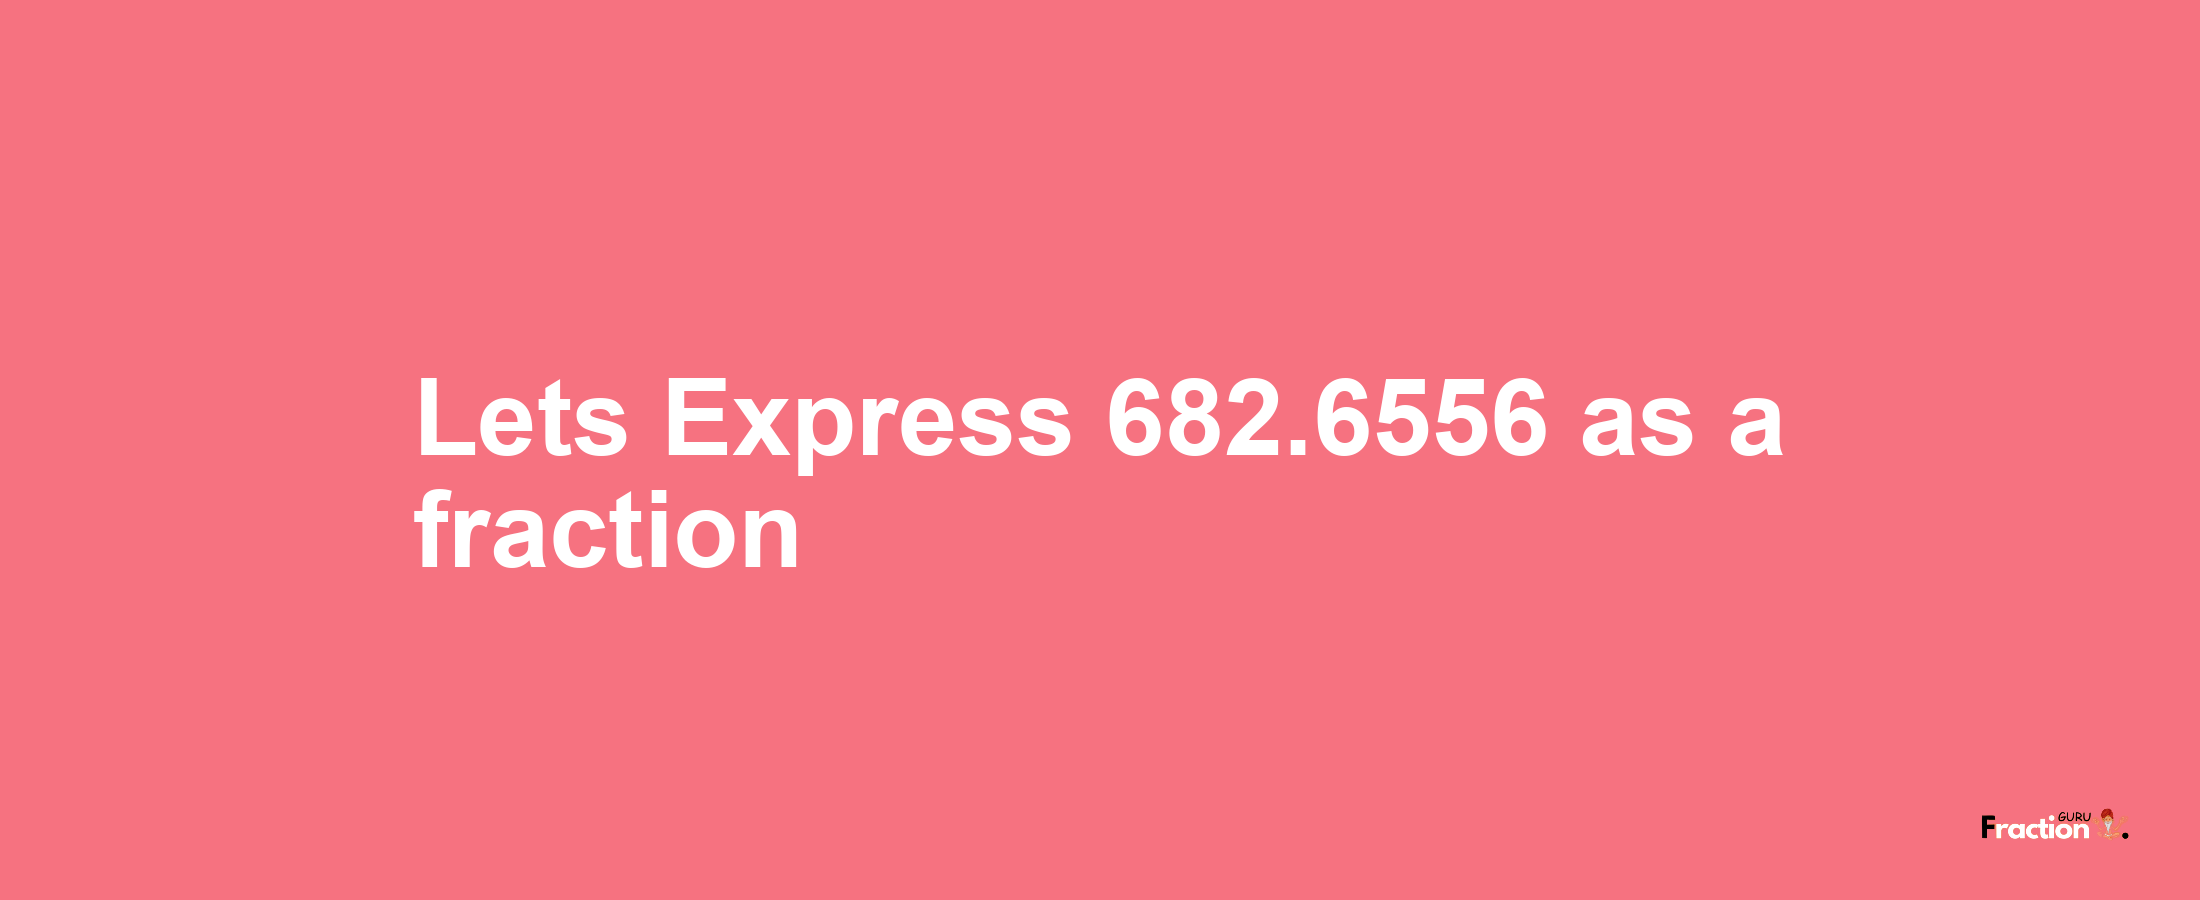 Lets Express 682.6556 as afraction